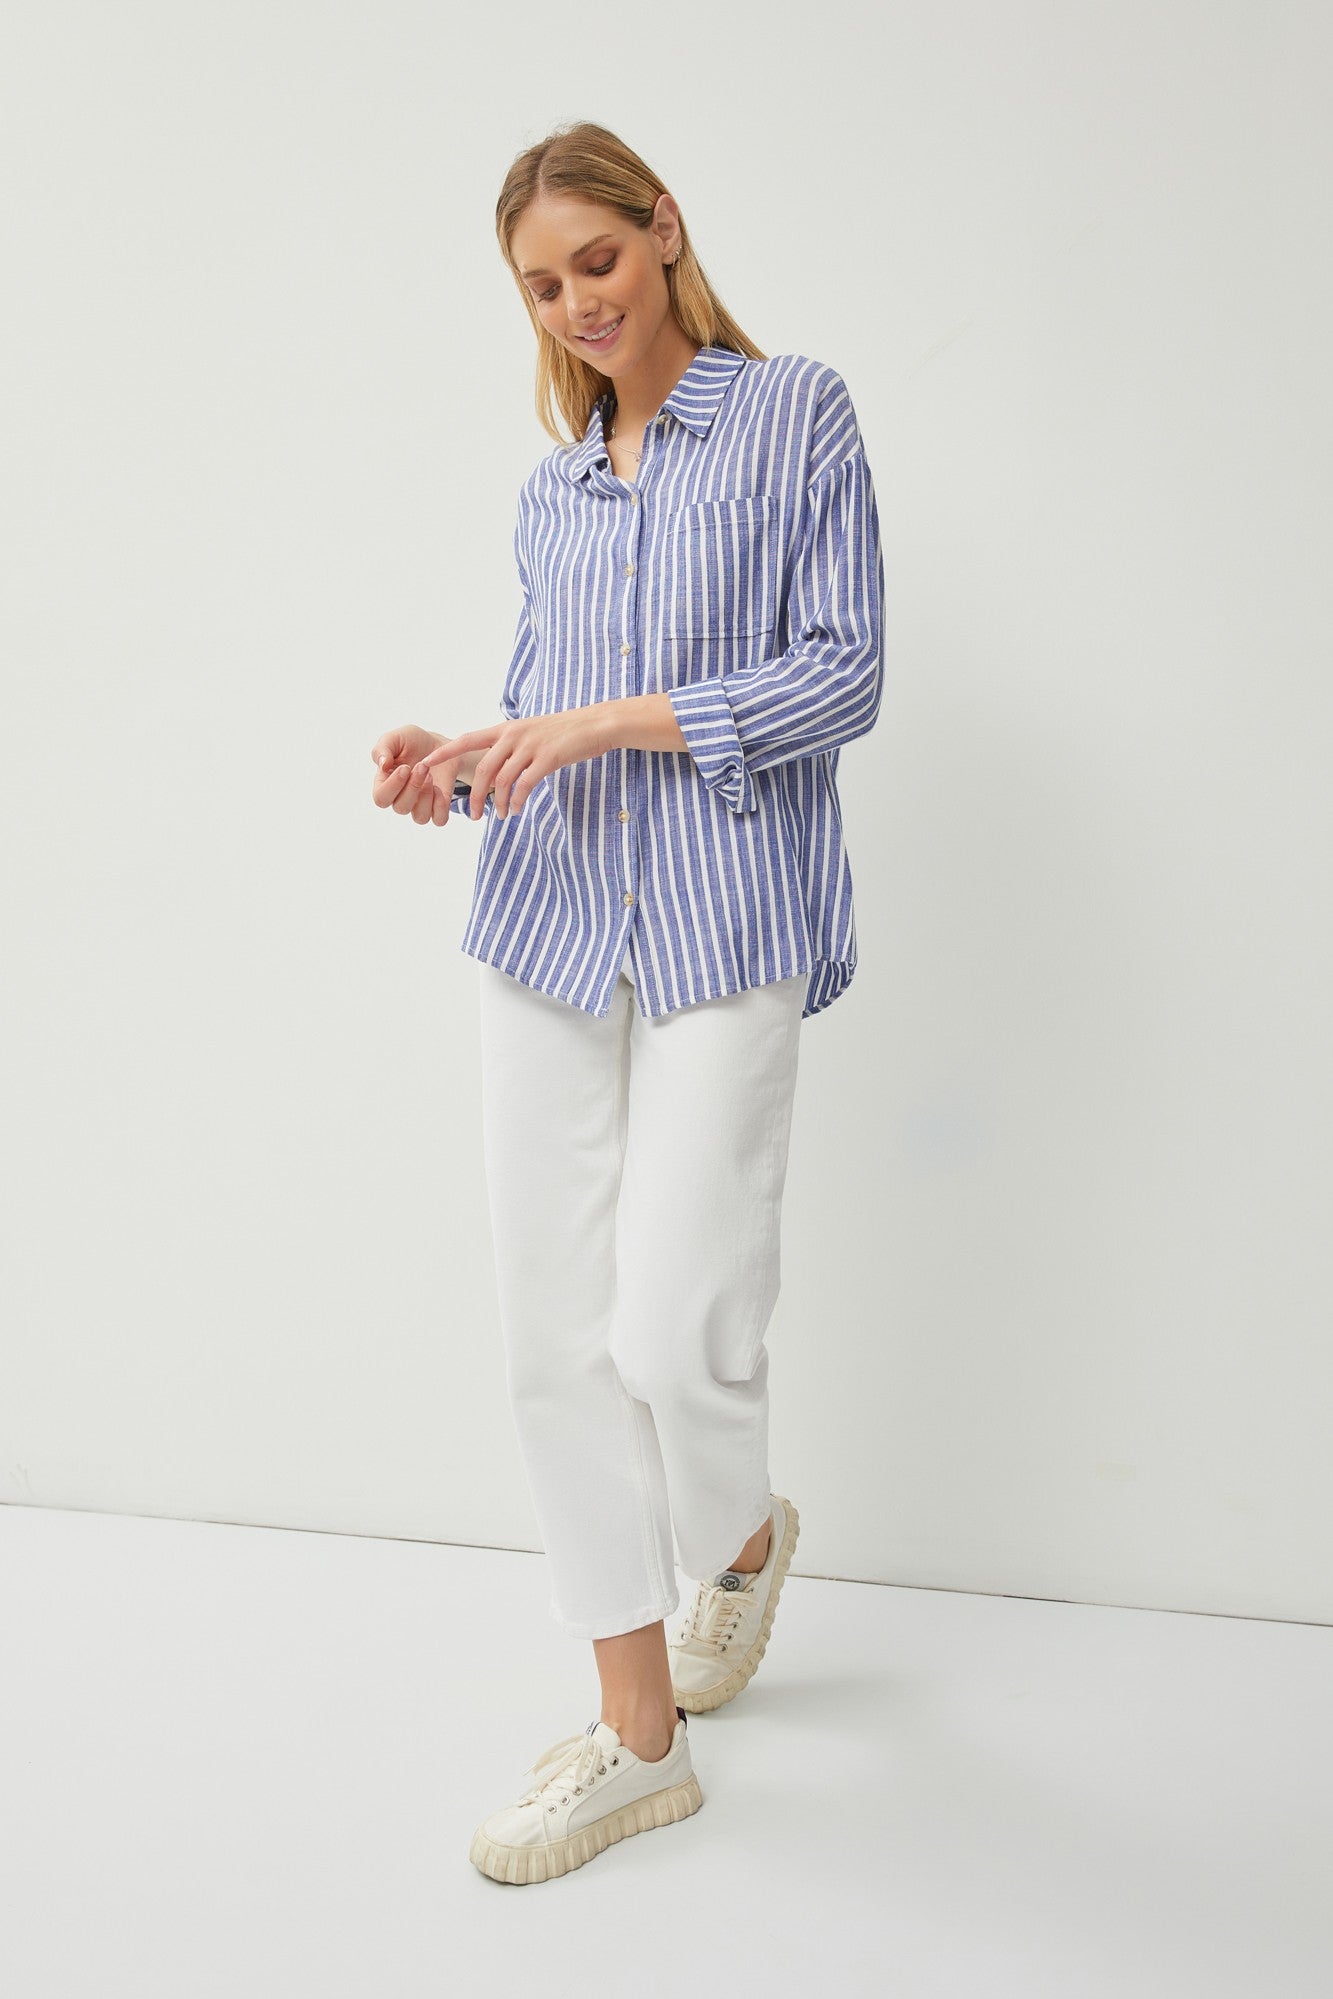 Oceans Away Striped Button Down